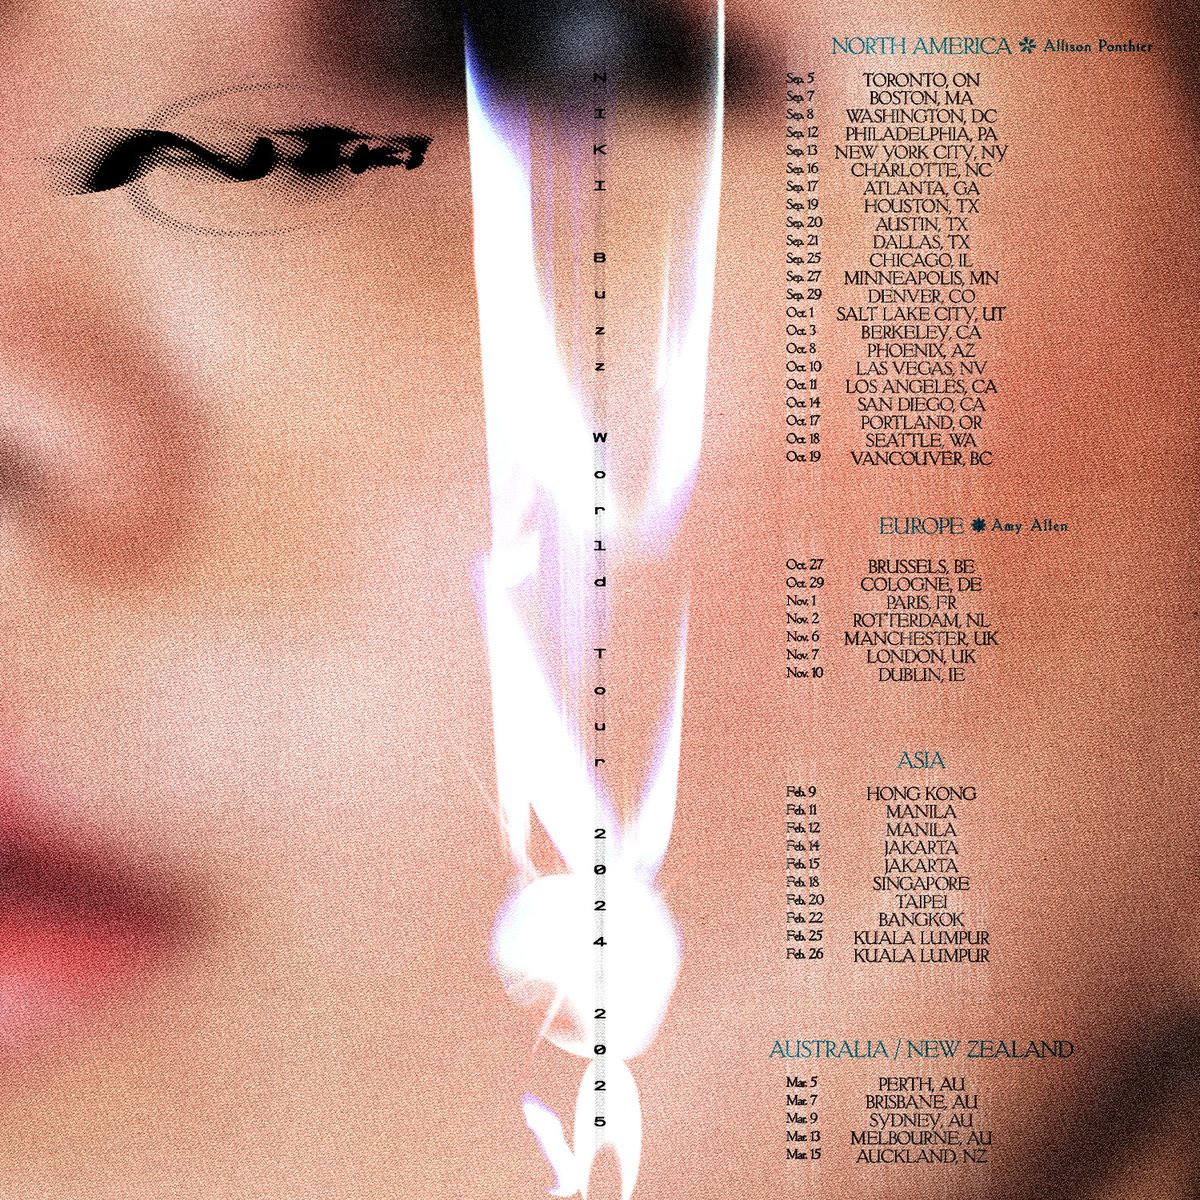 BUZZ WORLD TOUR 2024-2025 !! With support from two of my favorite songwriters @allisonponthier & @AmyAllenMusic ⚡️ Pre-sale for North America, UK, & Europe tomorrow 10AM local. Asia & Australia on-sale will be later this year in the fall! 🤍 SEE YOU ALL AGAIN SOOOON